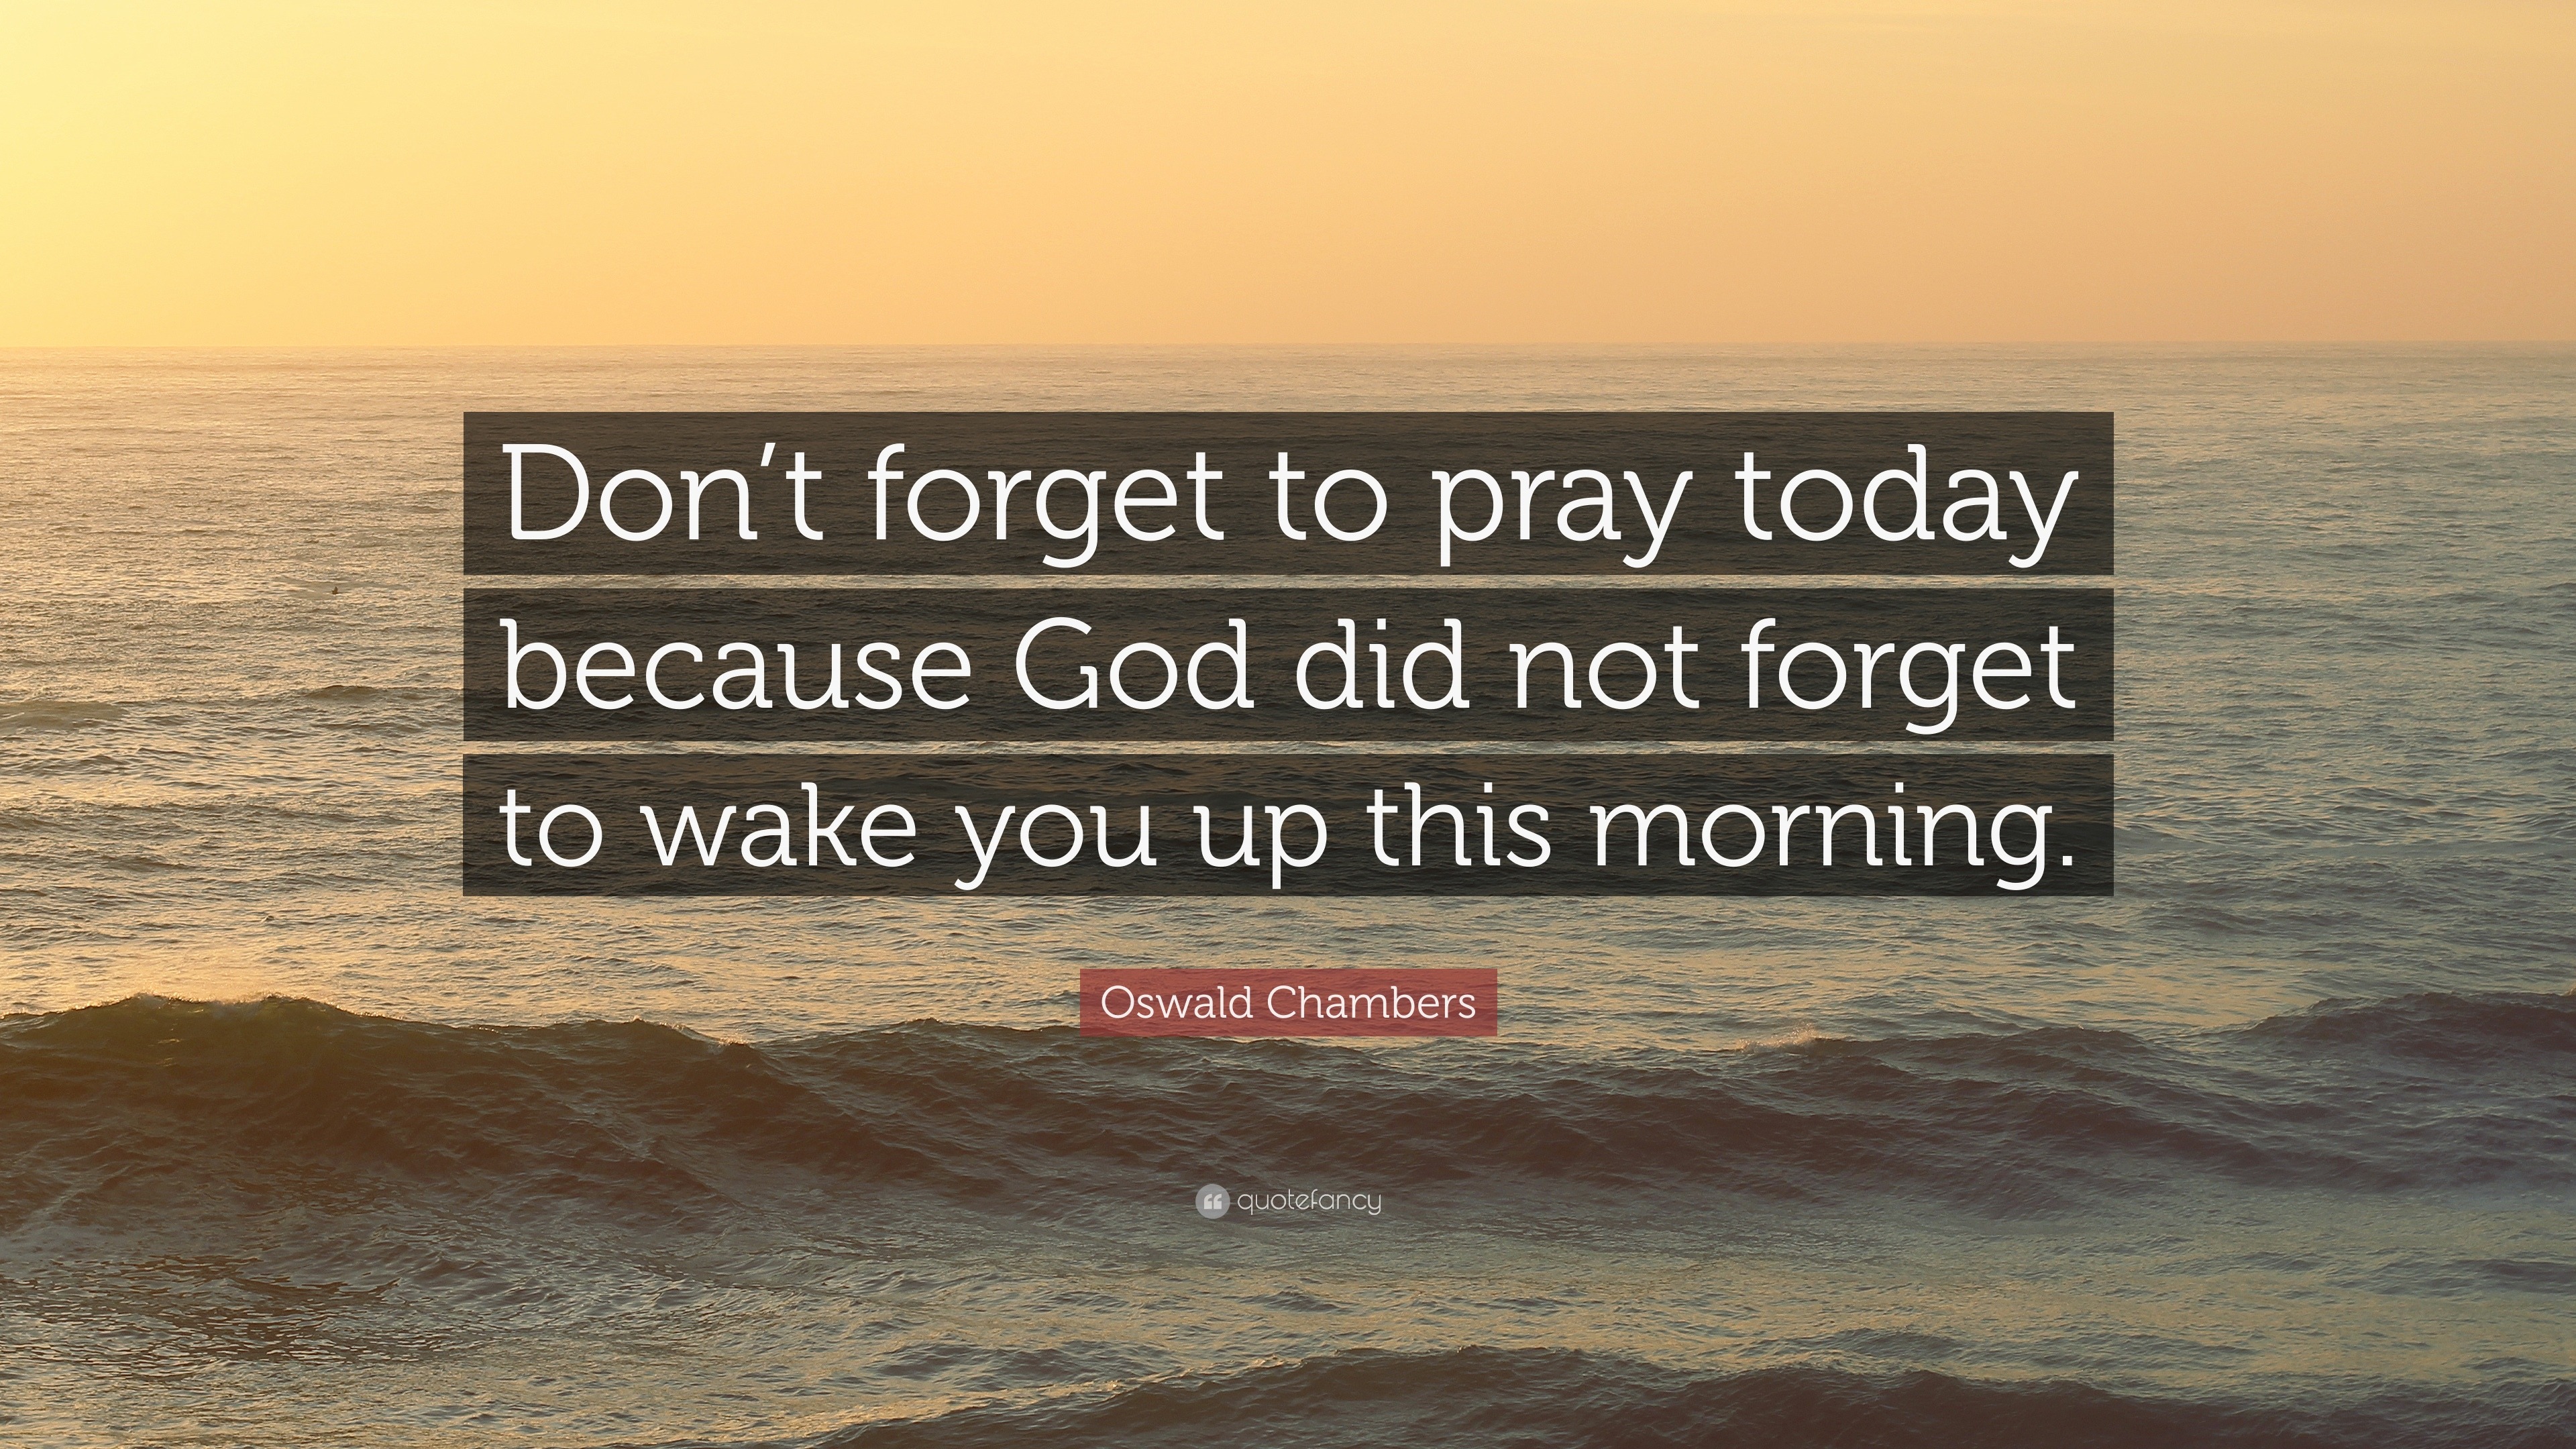 oswald-chambers-quote-don-t-forget-to-pray-today-because-god-did-not